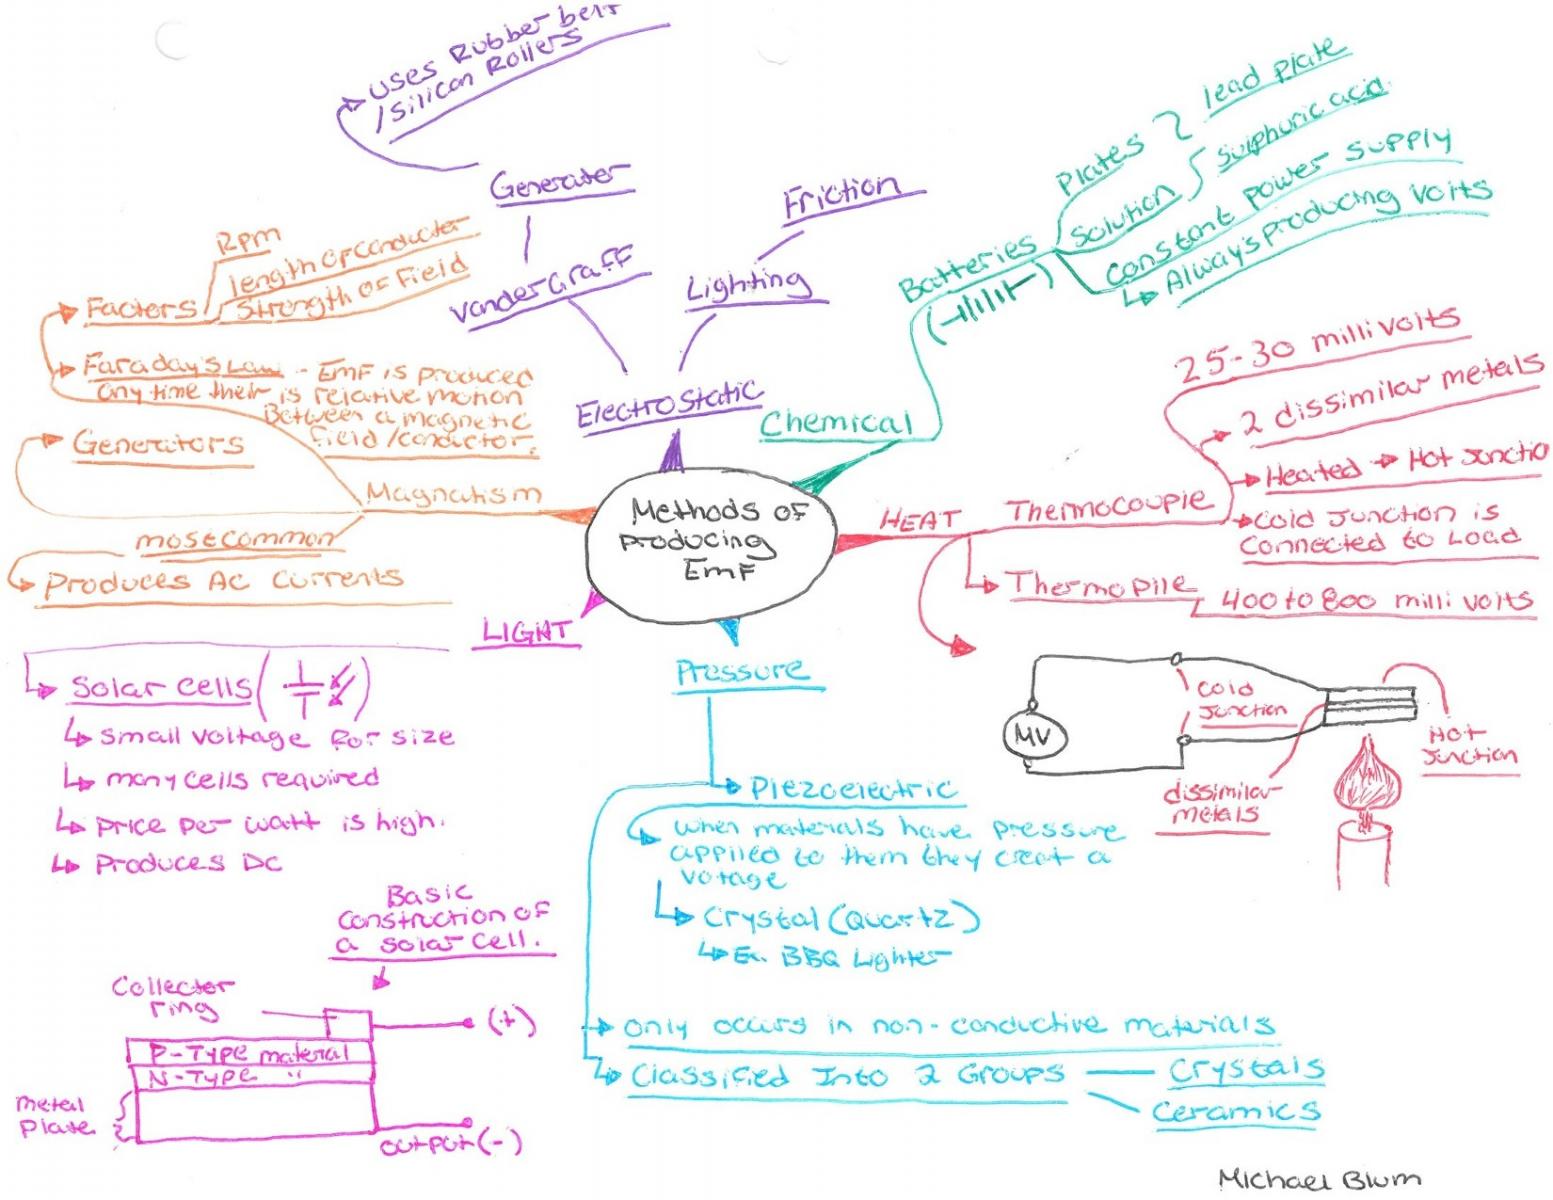 A mind map on producing electromagnetic fields